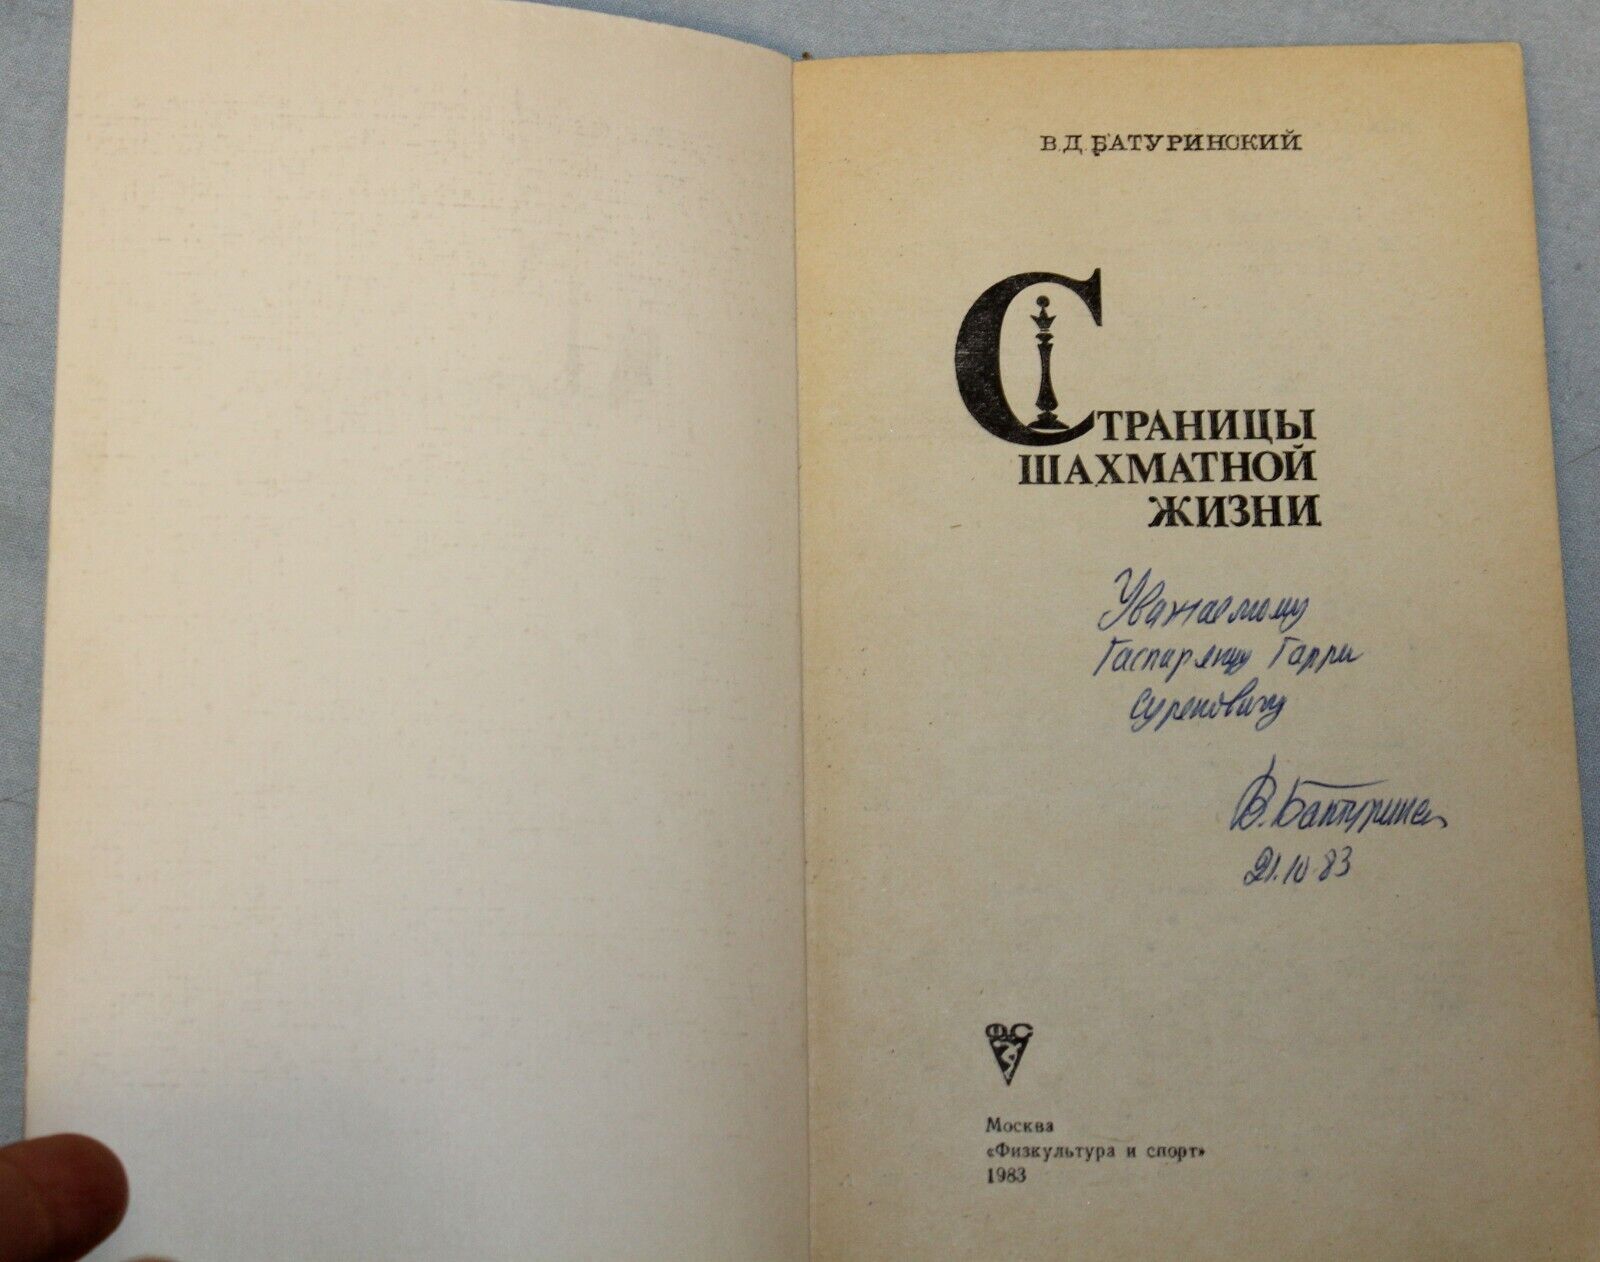 10967.Book. Signed by Victor Baturinsky to Gasparyants. The pages of chess life. 1983